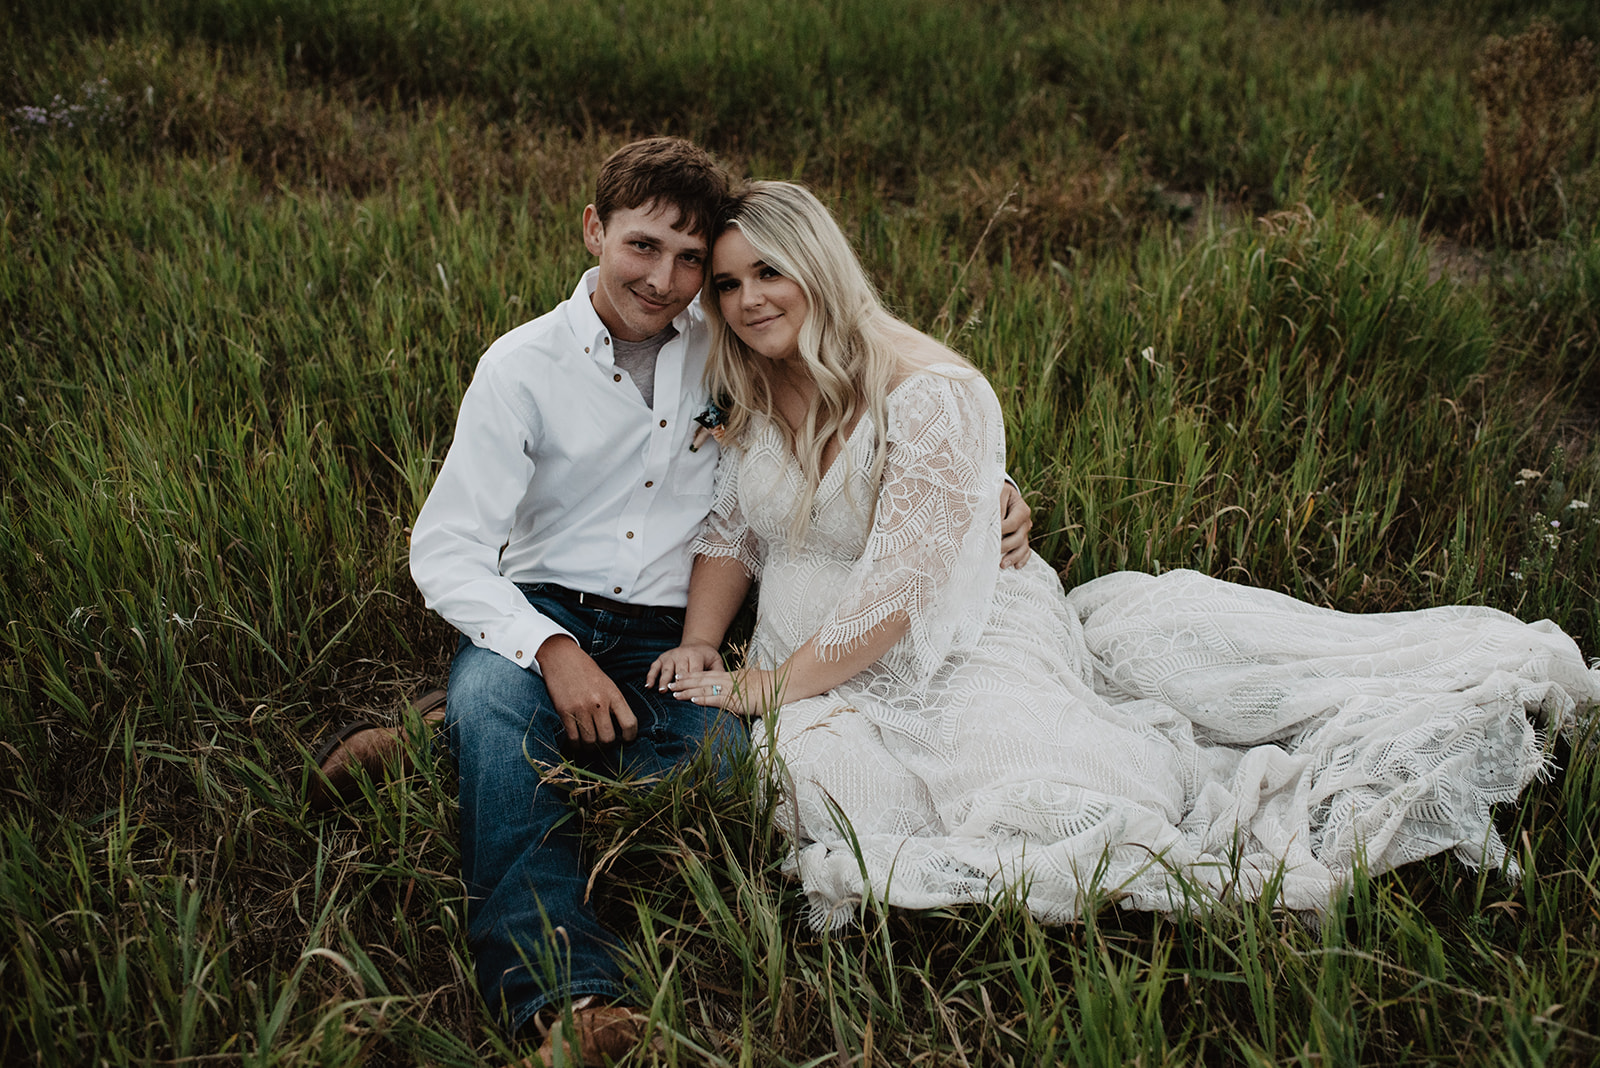 wedding photo in the Grand Tetons with man and woman sitting in a grass frield together holding hands and smiling with their heads tilted together